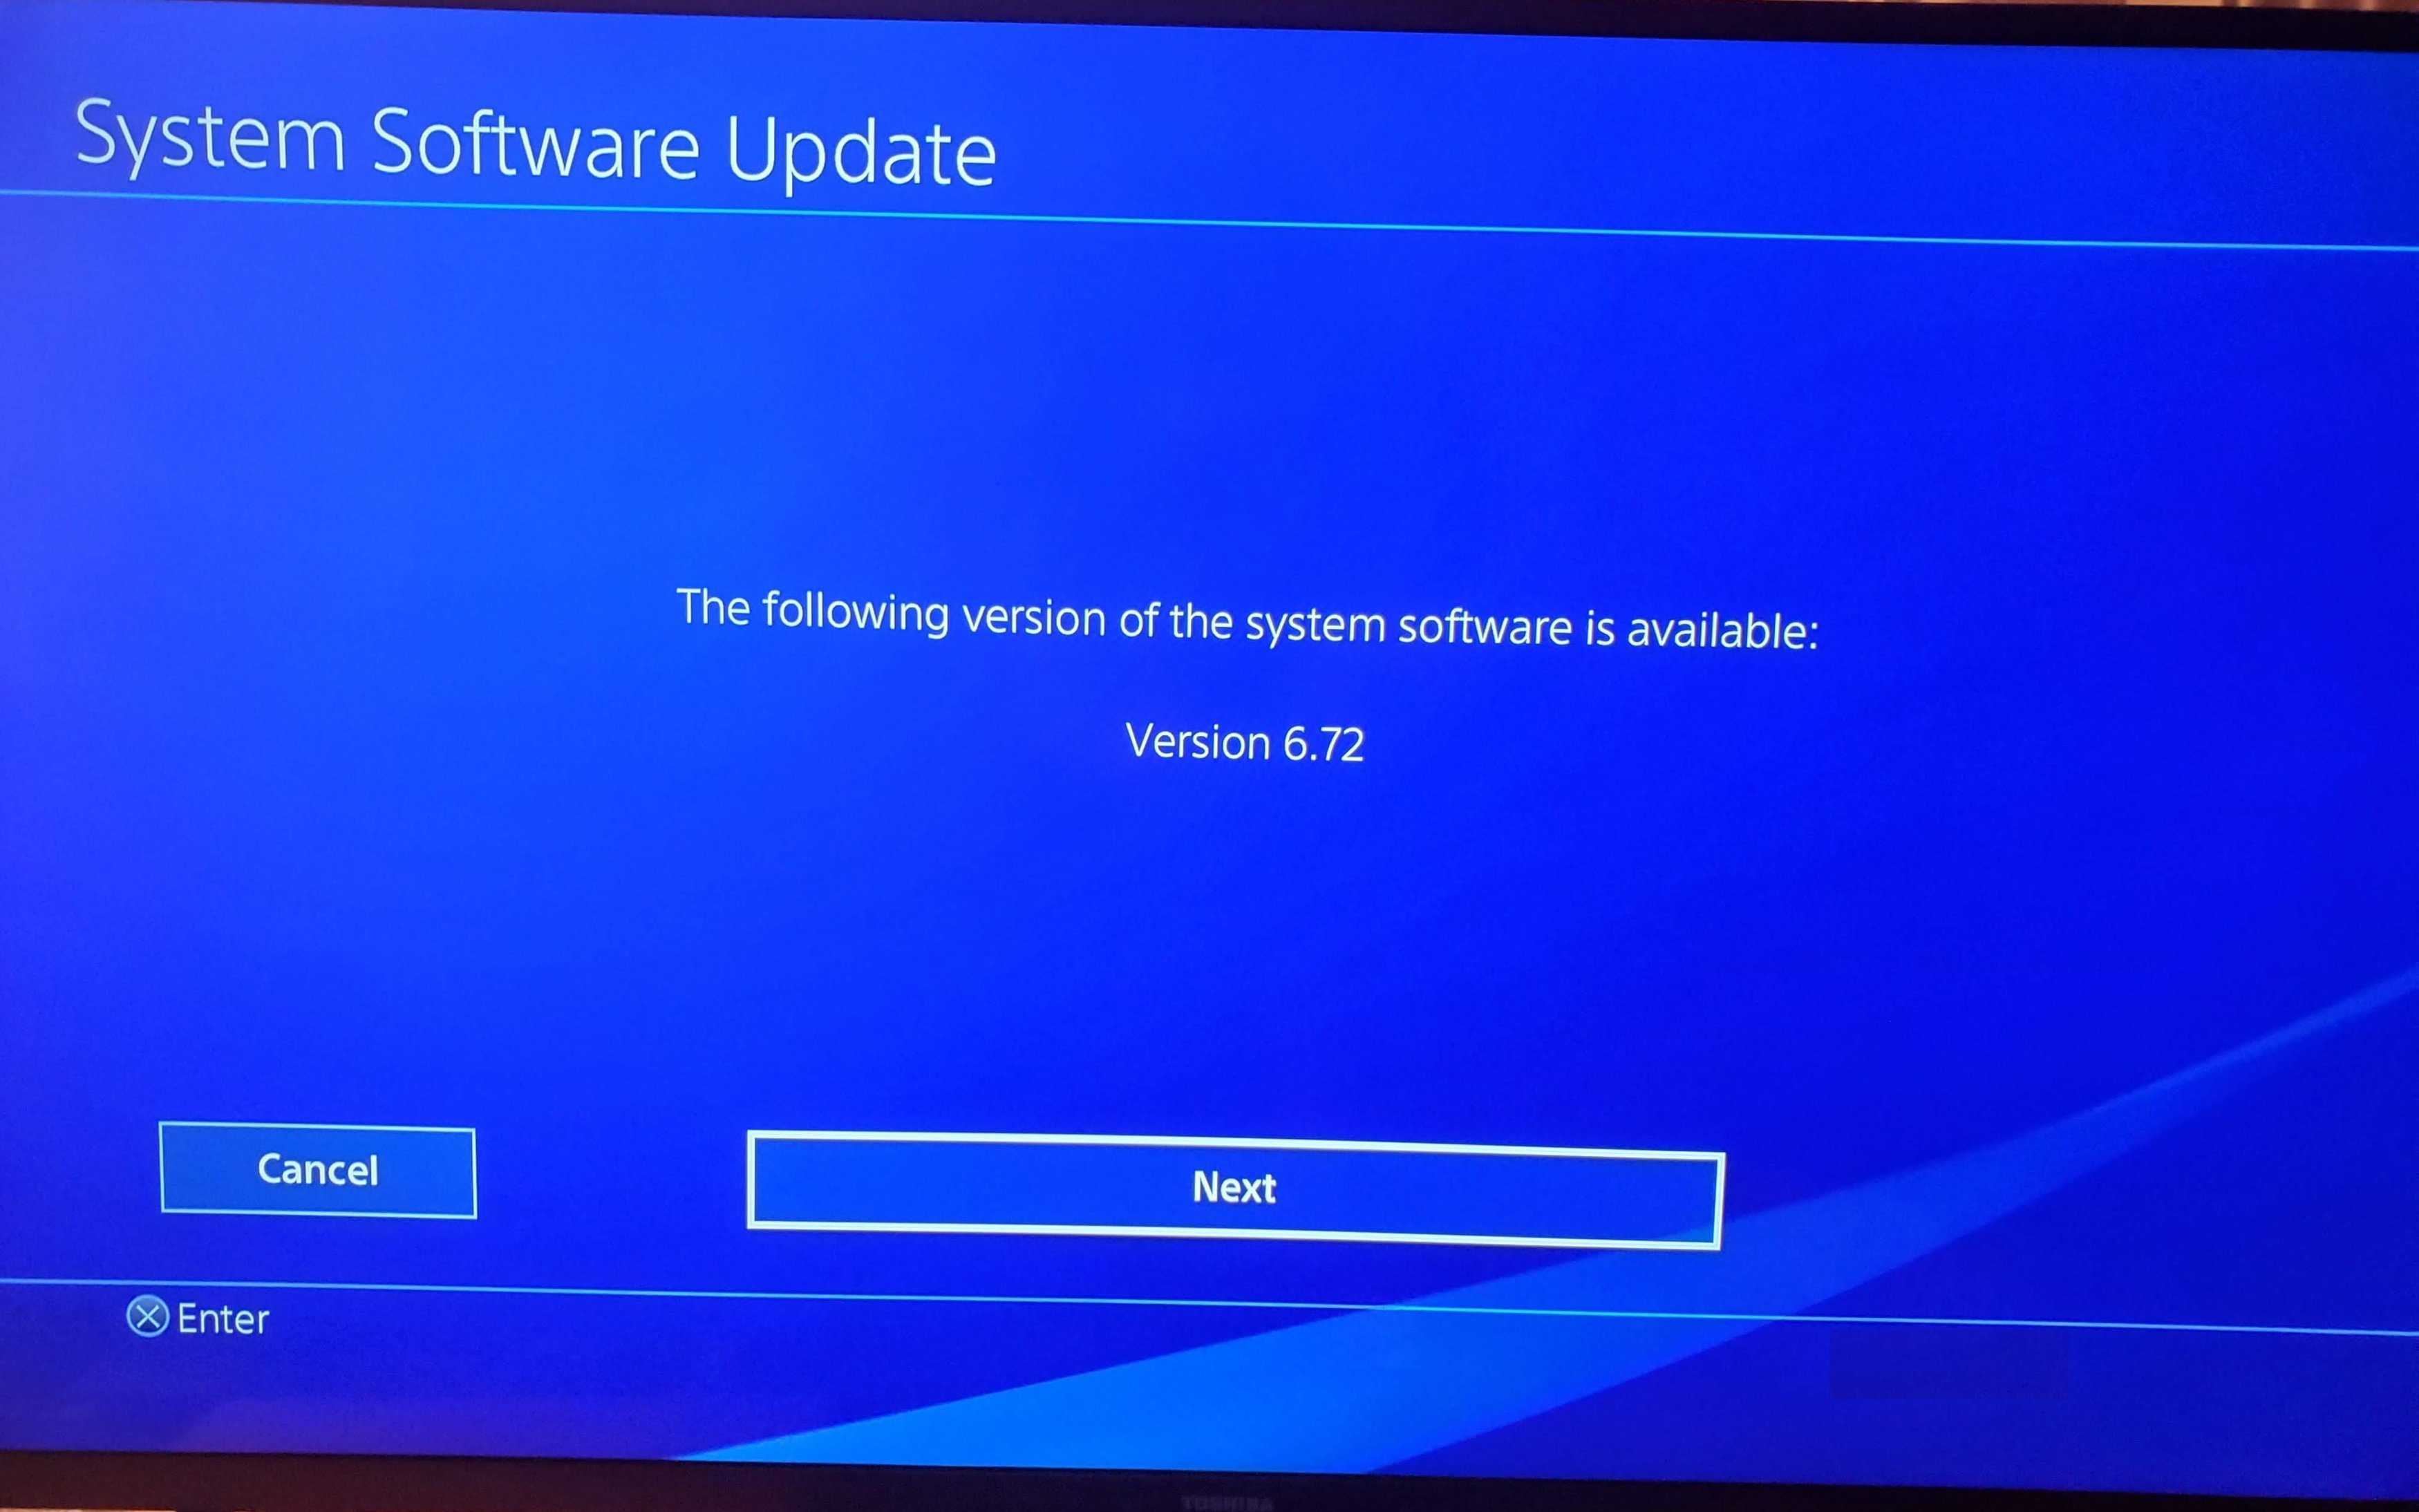 ps4 firmware 6.72 release date